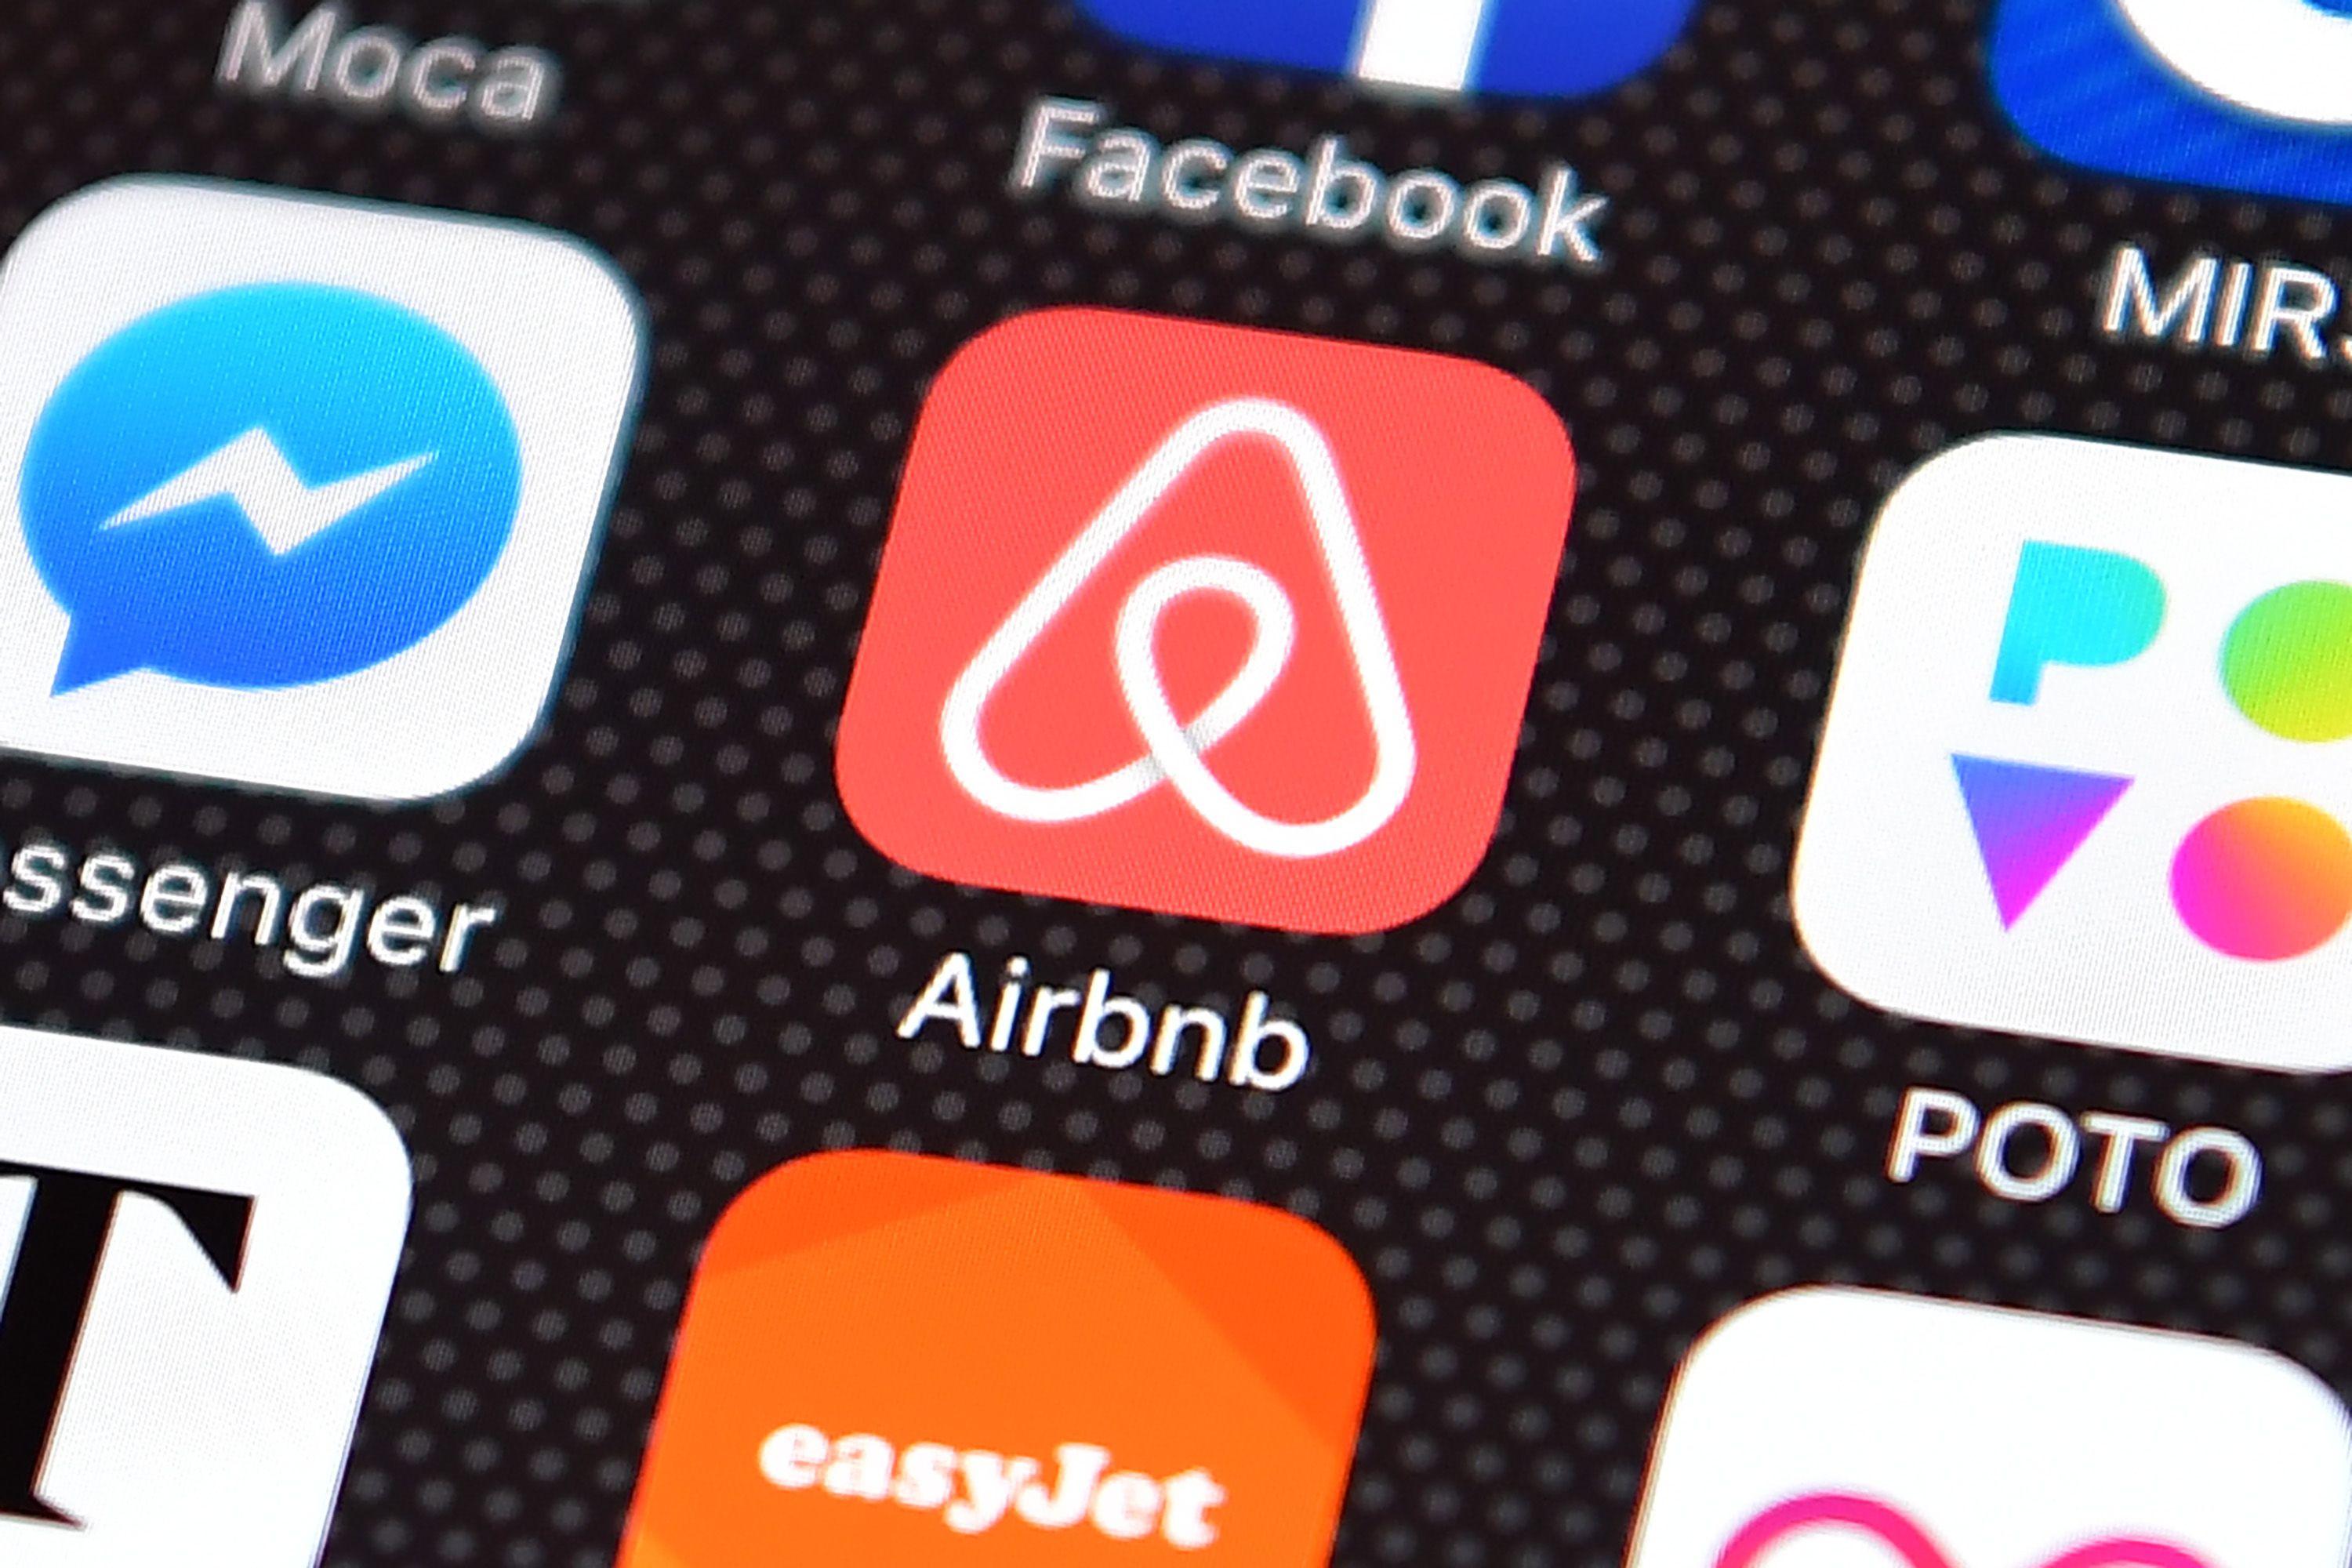 Airbnb App Logo - Renting an Airbnb Could Be Risky For Your Safety, Study Says | Time